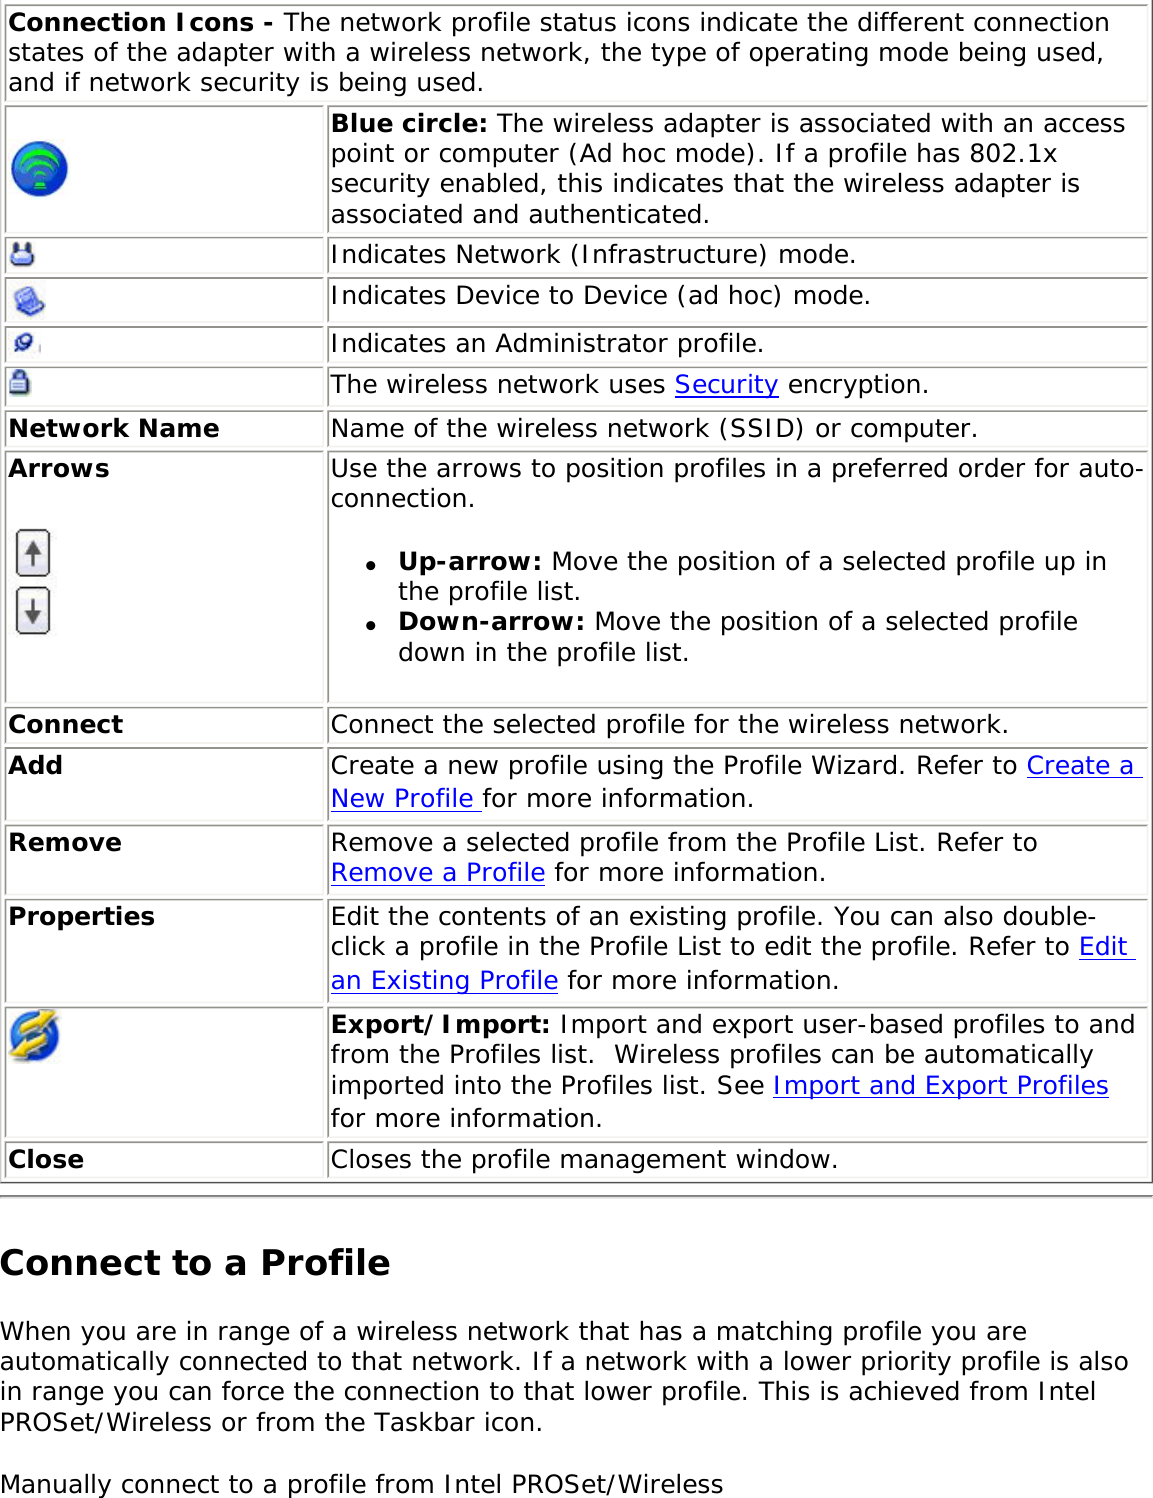 Connection Icons - The network profile status icons indicate the different connection states of the adapter with a wireless network, the type of operating mode being used, and if network security is being used. Blue circle: The wireless adapter is associated with an access point or computer (Ad hoc mode). If a profile has 802.1x security enabled, this indicates that the wireless adapter is associated and authenticated.Indicates Network (Infrastructure) mode.Indicates Device to Device (ad hoc) mode.Indicates an Administrator profile. The wireless network uses Security encryption.Network Name Name of the wireless network (SSID) or computer.Arrows  Use the arrows to position profiles in a preferred order for auto-connection. ●     Up-arrow: Move the position of a selected profile up in the profile list. ●     Down-arrow: Move the position of a selected profile down in the profile list.   Connect Connect the selected profile for the wireless network.Add  Create a new profile using the Profile Wizard. Refer to Create a New Profile for more information.Remove  Remove a selected profile from the Profile List. Refer to Remove a Profile for more information.Properties Edit the contents of an existing profile. You can also double-click a profile in the Profile List to edit the profile. Refer to Edit an Existing Profile for more information.Export/Import: Import and export user-based profiles to and from the Profiles list.  Wireless profiles can be automatically imported into the Profiles list. See Import and Export Profiles for more information.Close Closes the profile management window.Connect to a ProfileWhen you are in range of a wireless network that has a matching profile you are automatically connected to that network. If a network with a lower priority profile is also in range you can force the connection to that lower profile. This is achieved from Intel PROSet/Wireless or from the Taskbar icon. Manually connect to a profile from Intel PROSet/Wireless 